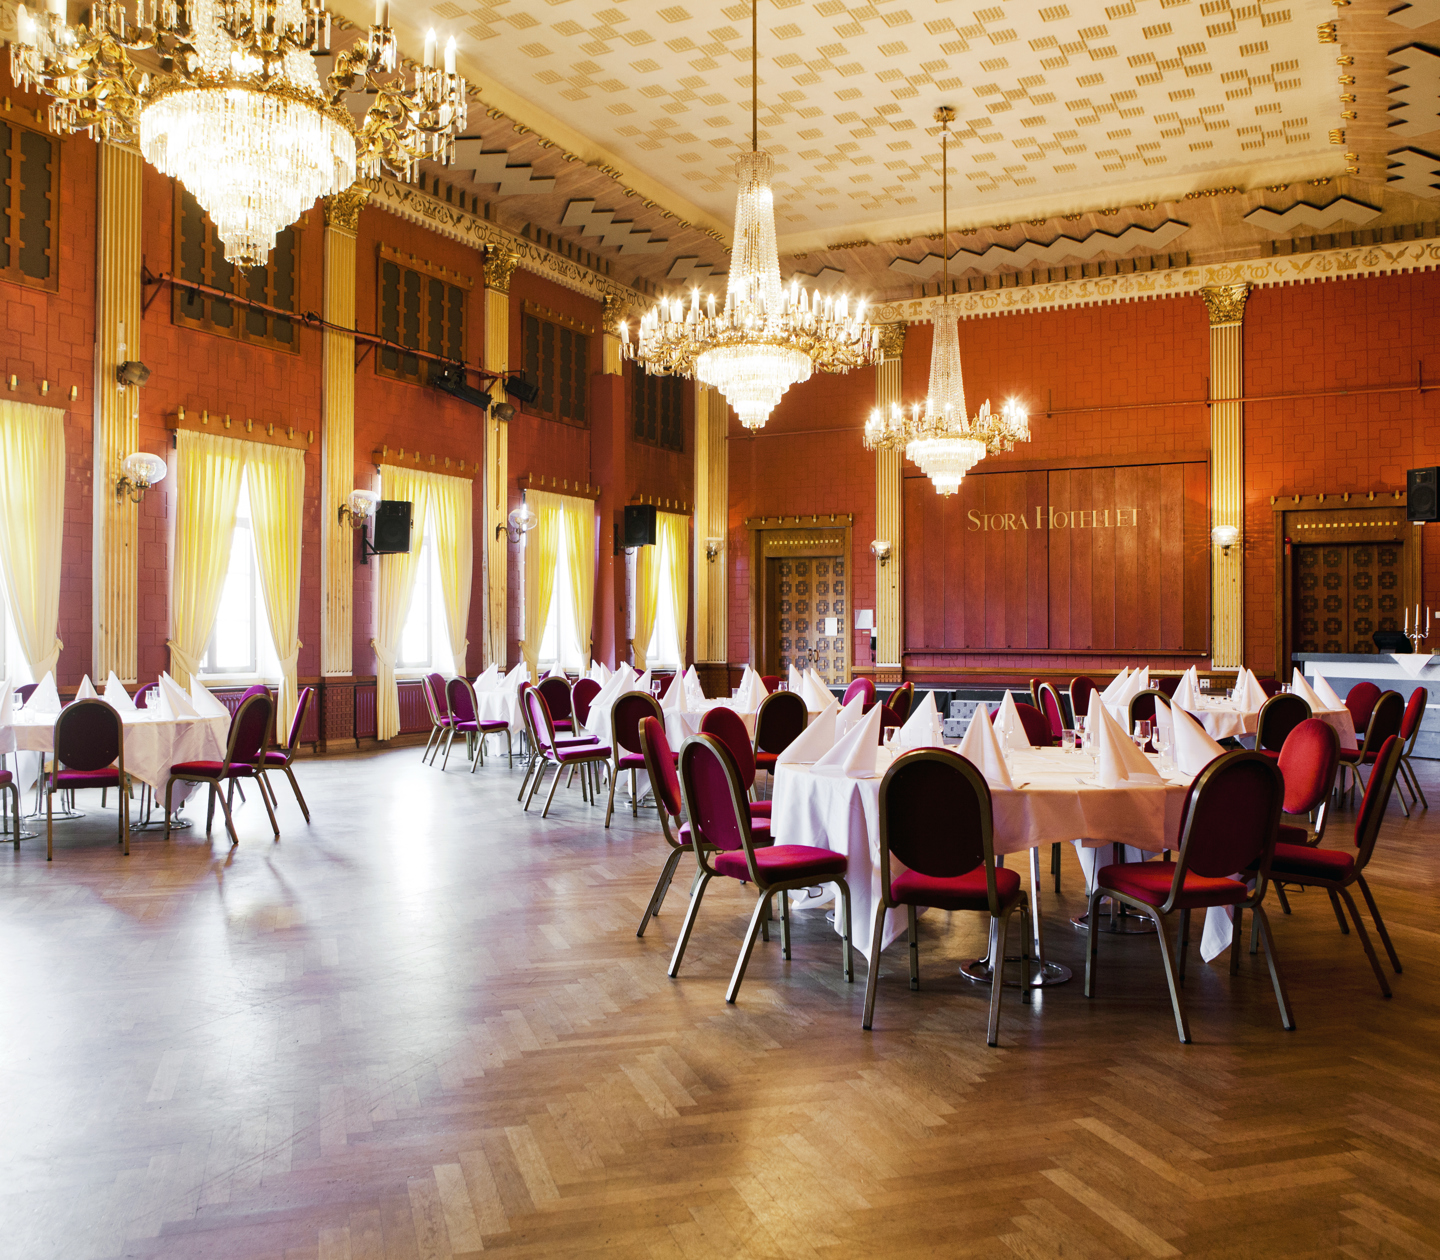 Large and grand venue with crystal chandeliers